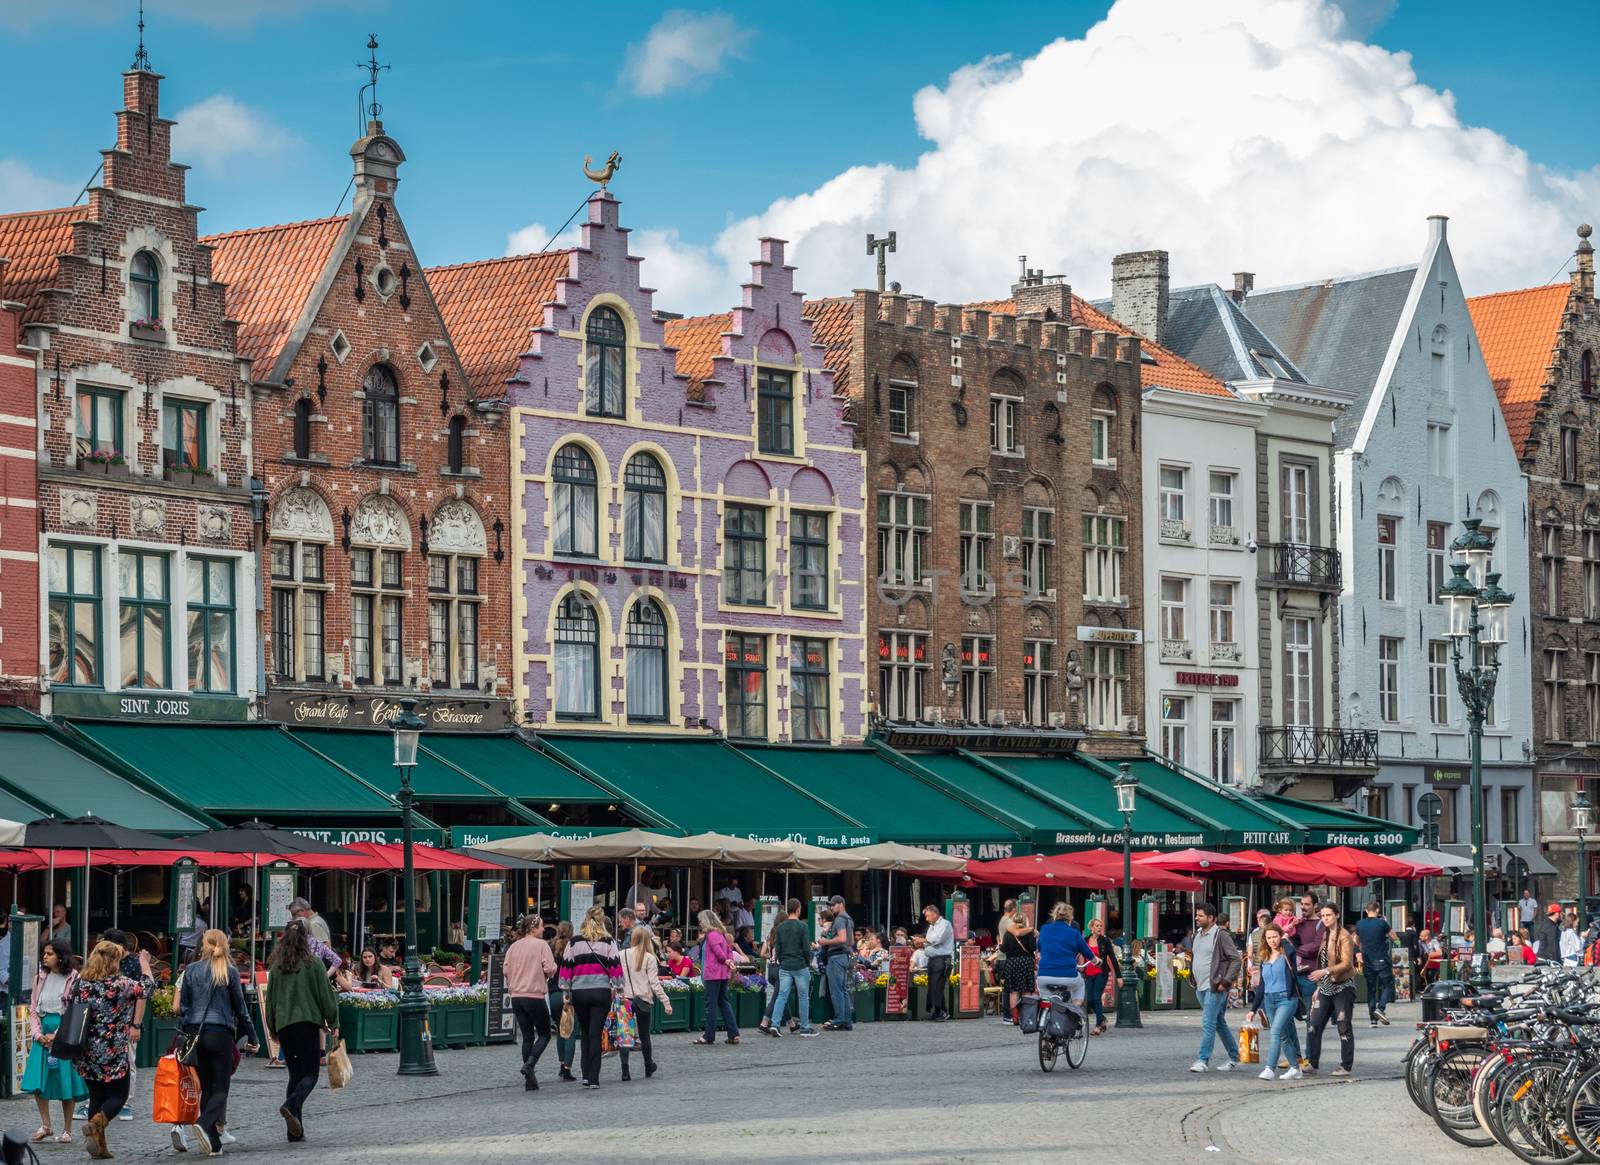 Bruges, Flanders, Belgium -  June 15, 2019: Brick stone facade row with step gables, now restaurants and bars with colored awnings, on NW side of Markt Square. People walking.